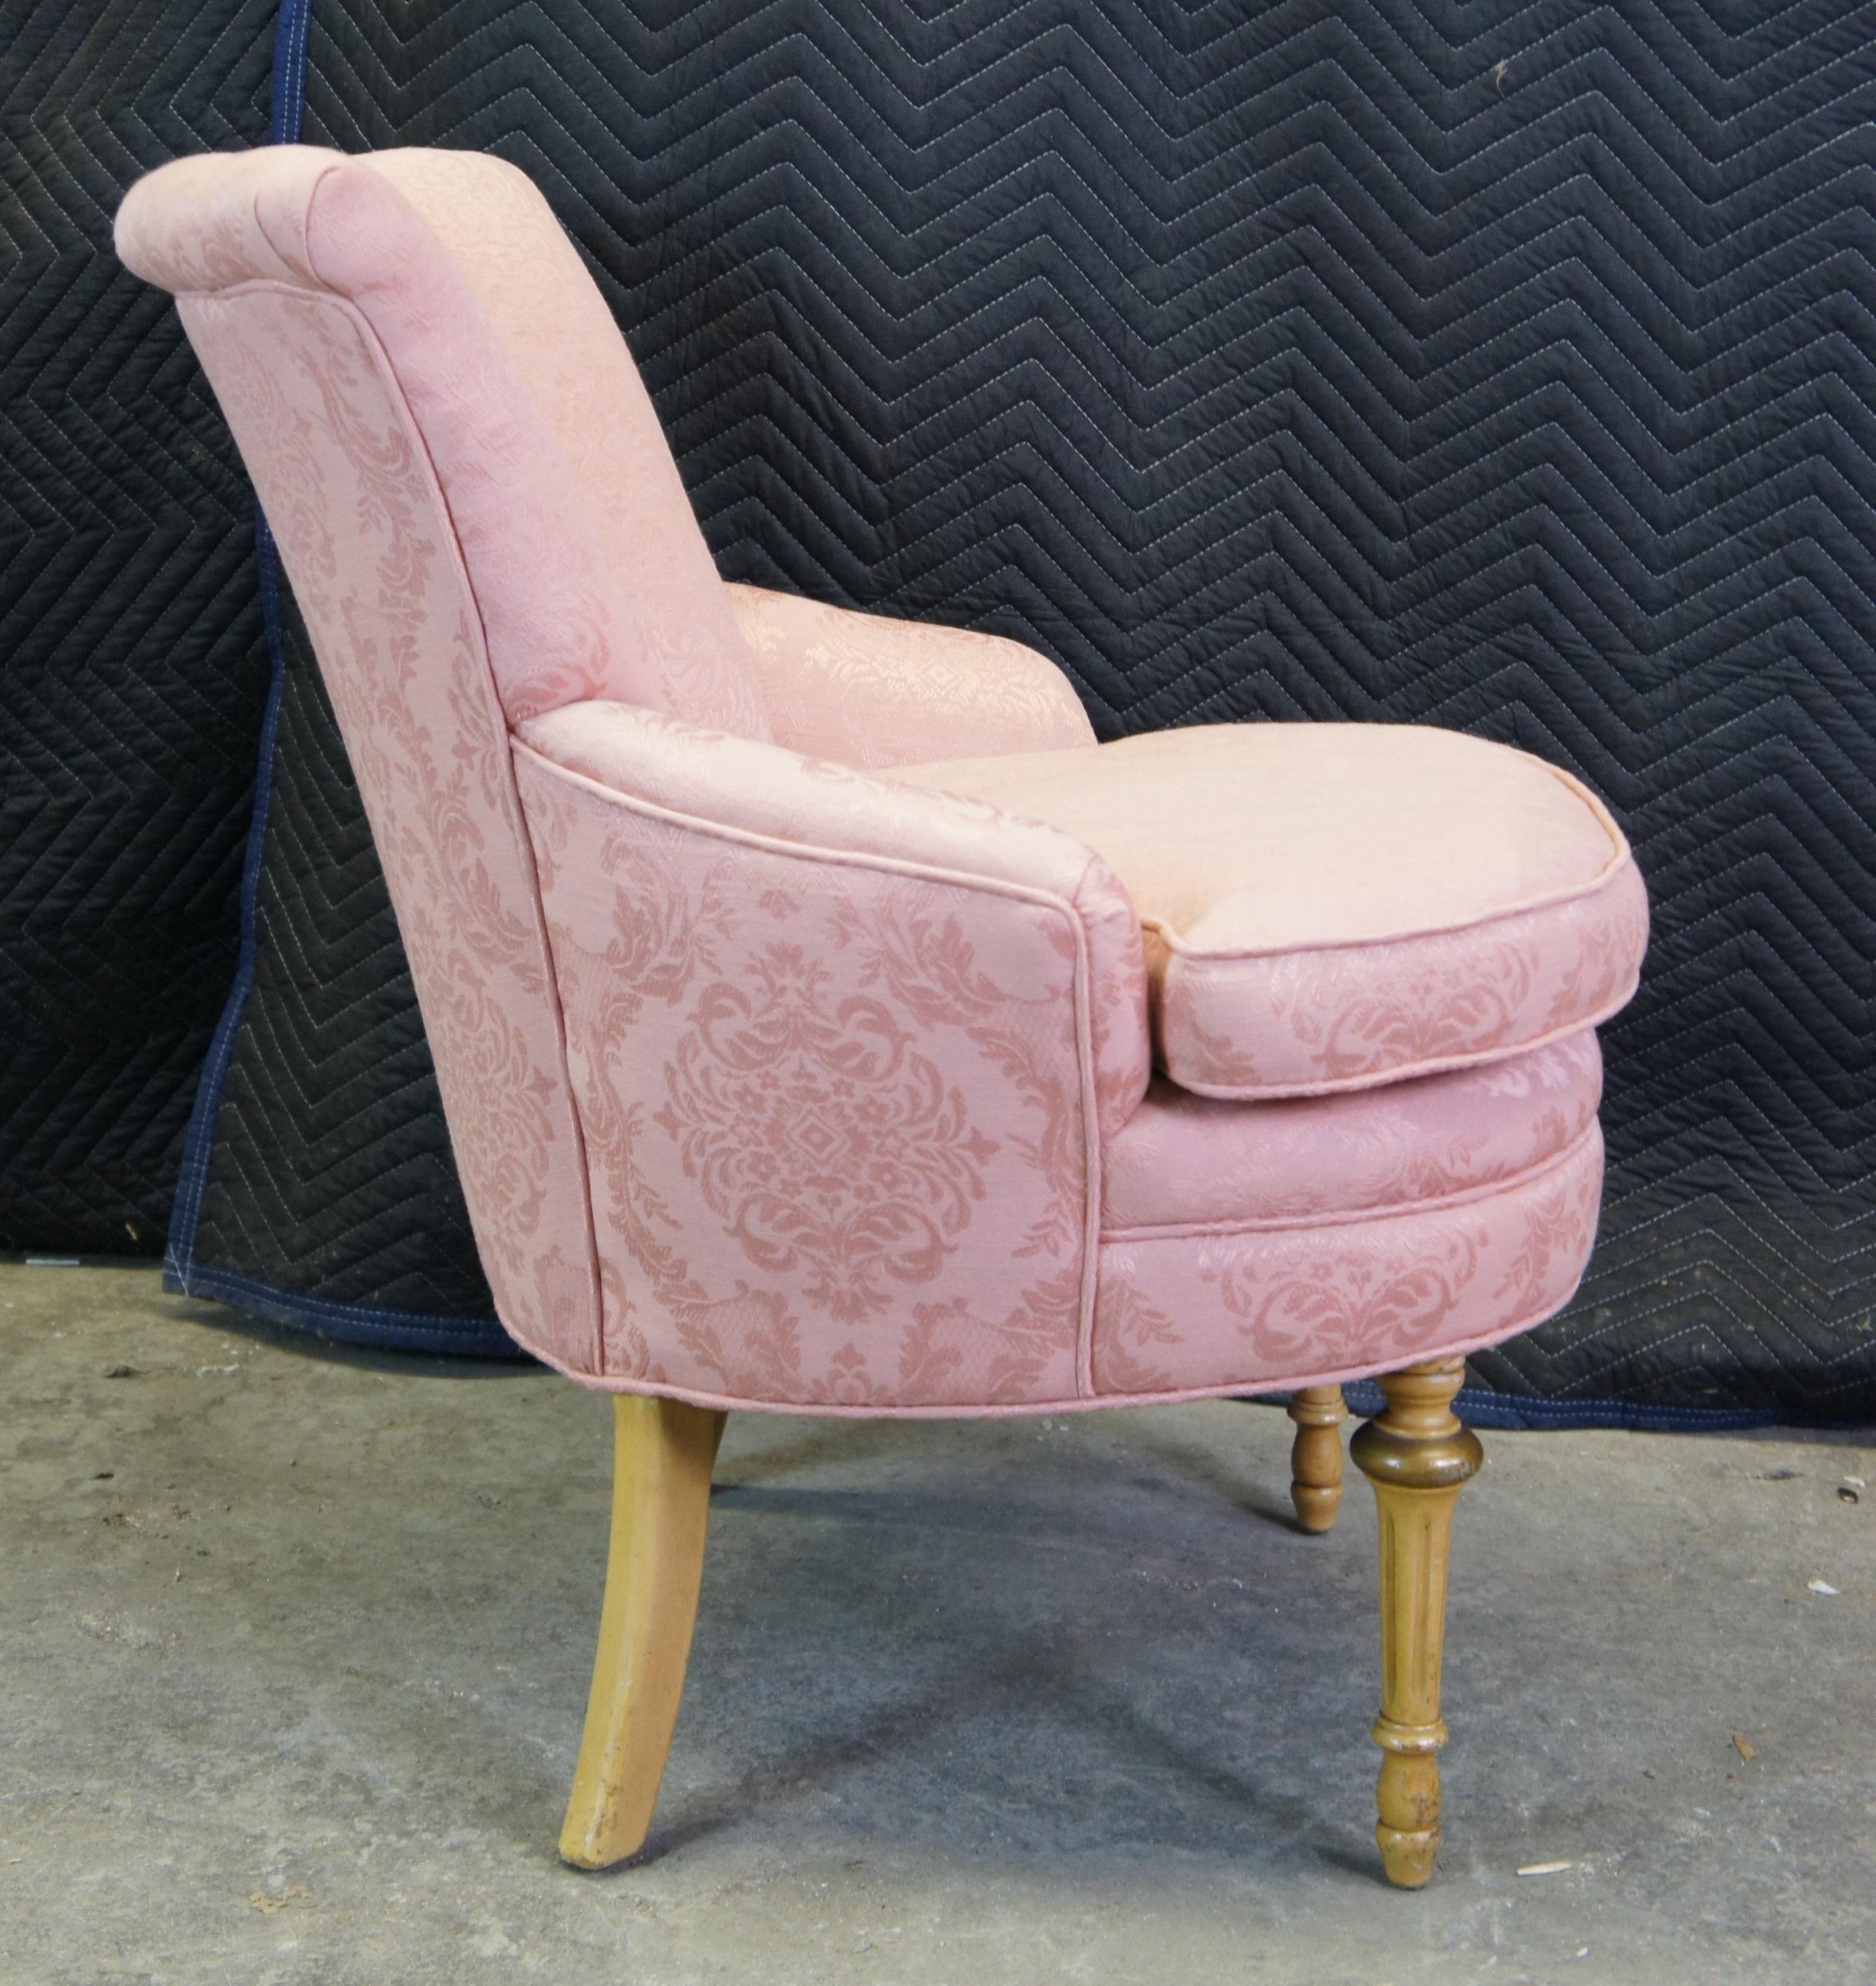 Antique Robert W Irwin French Provincial Channel Back Vanity Chair Pink Brocade 2